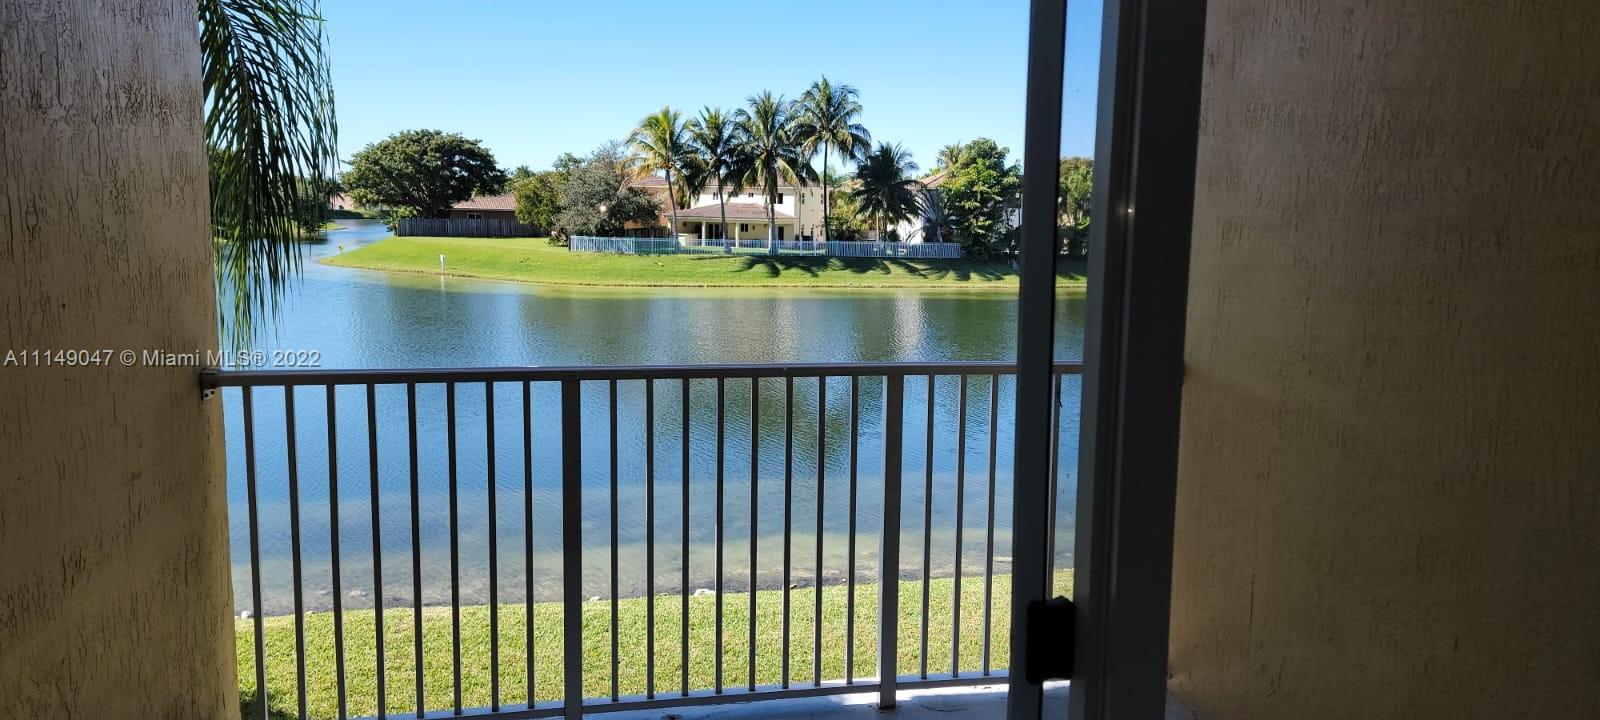 20950 SW 87th AVE #204 For Sale A11149047, FL